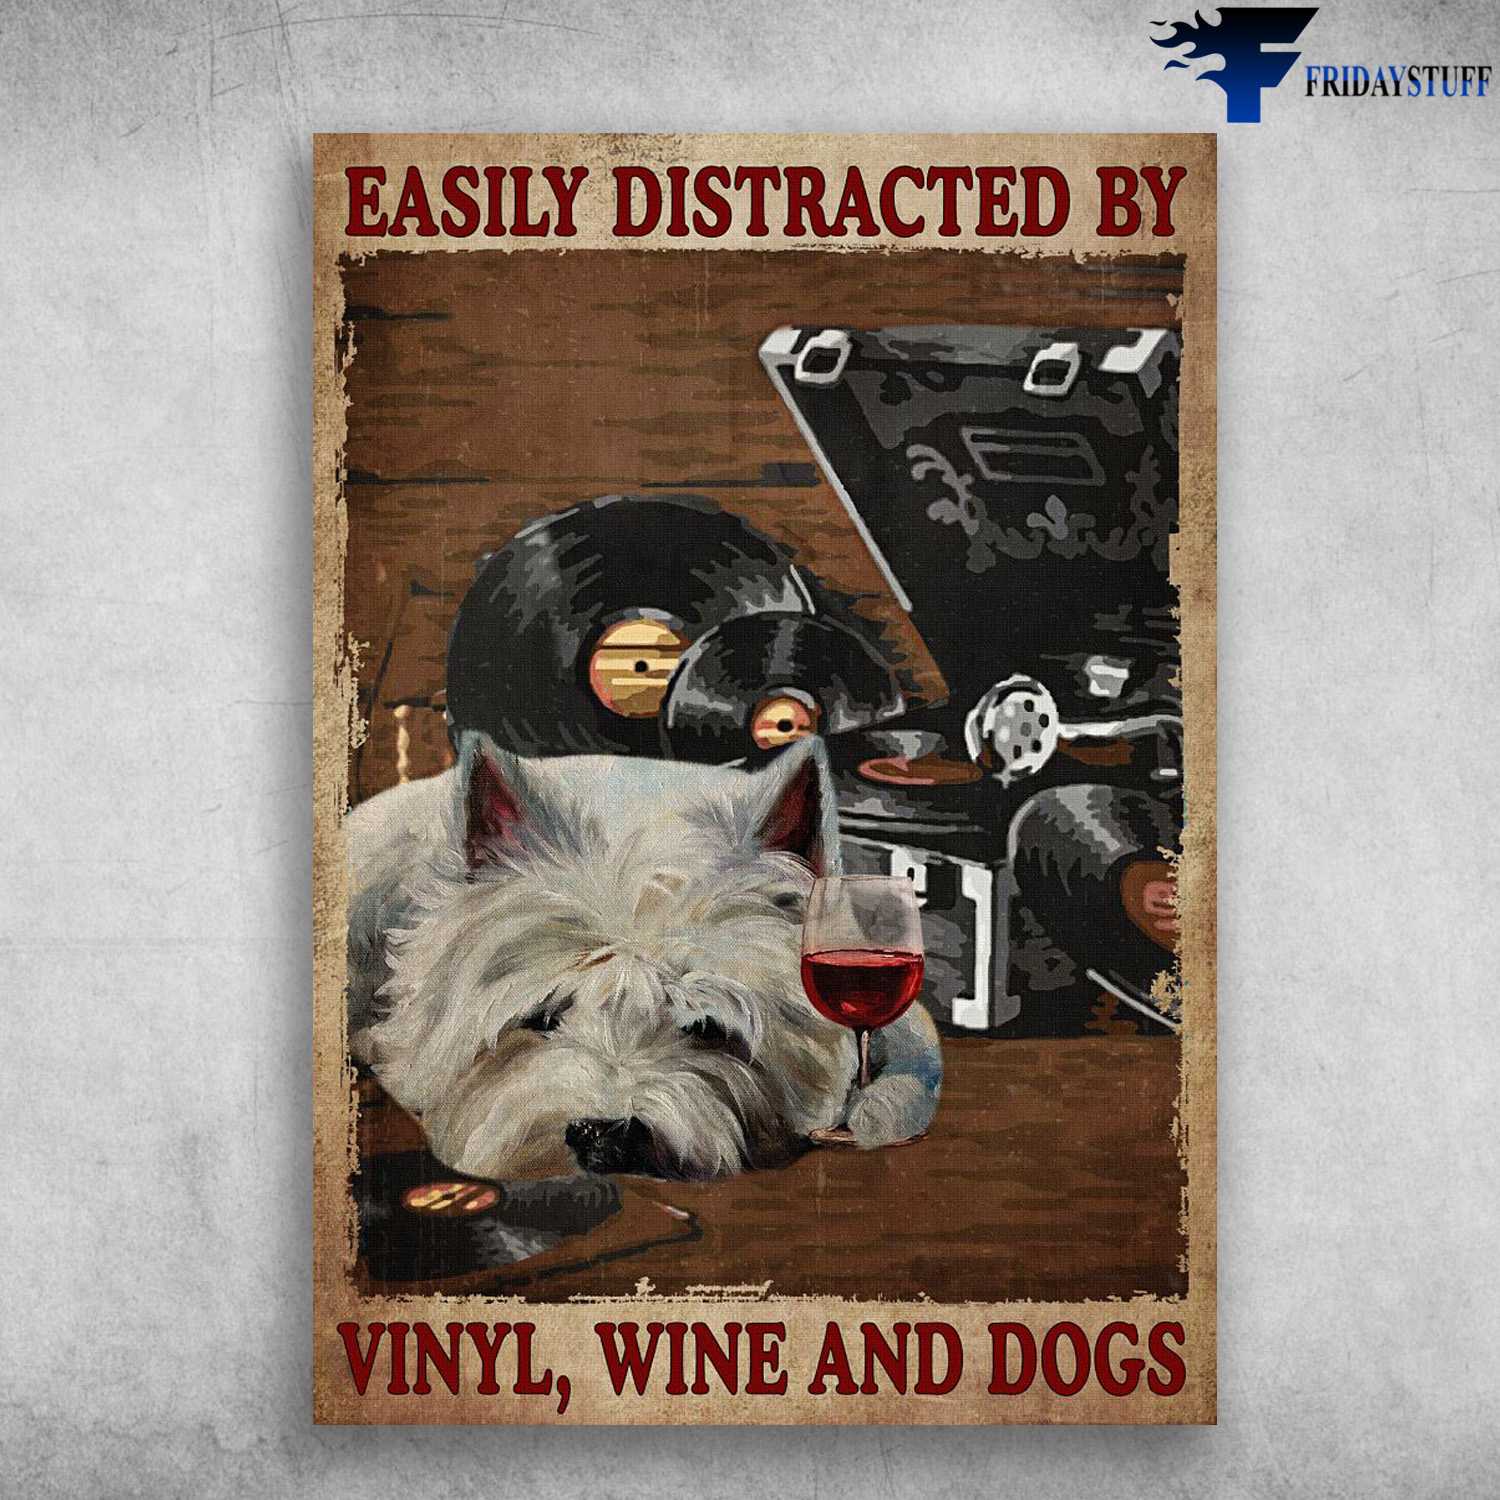 Vinyl Poster, Dog Lover, Music And Wine, Easily Distracted By Vinyl, Wine And Dogs